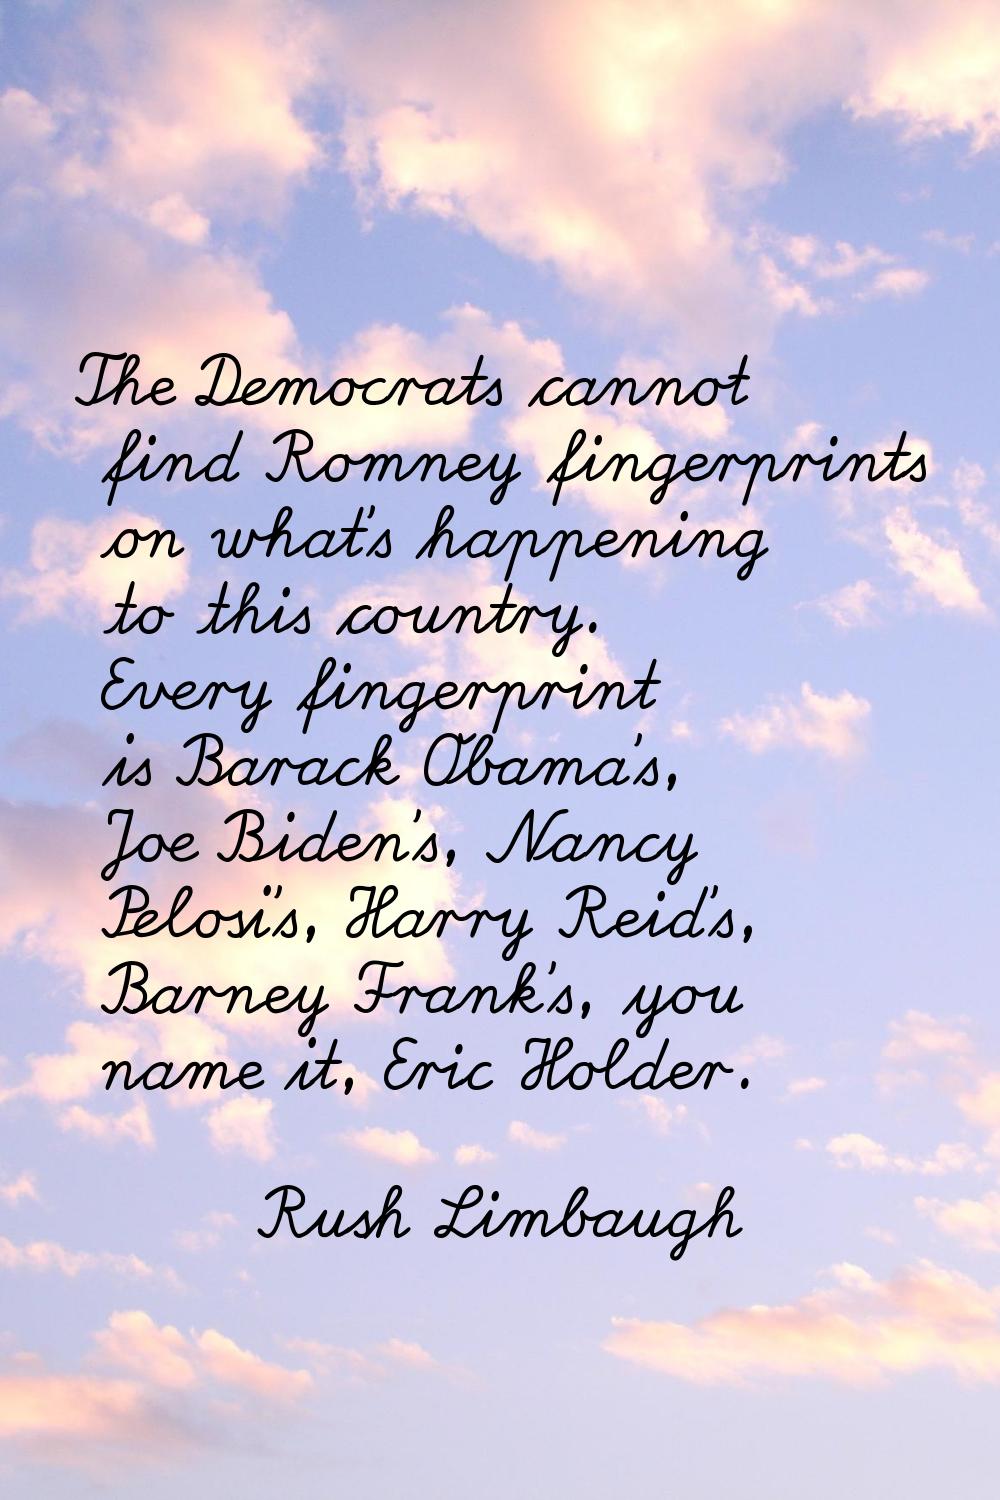 The Democrats cannot find Romney fingerprints on what's happening to this country. Every fingerprin